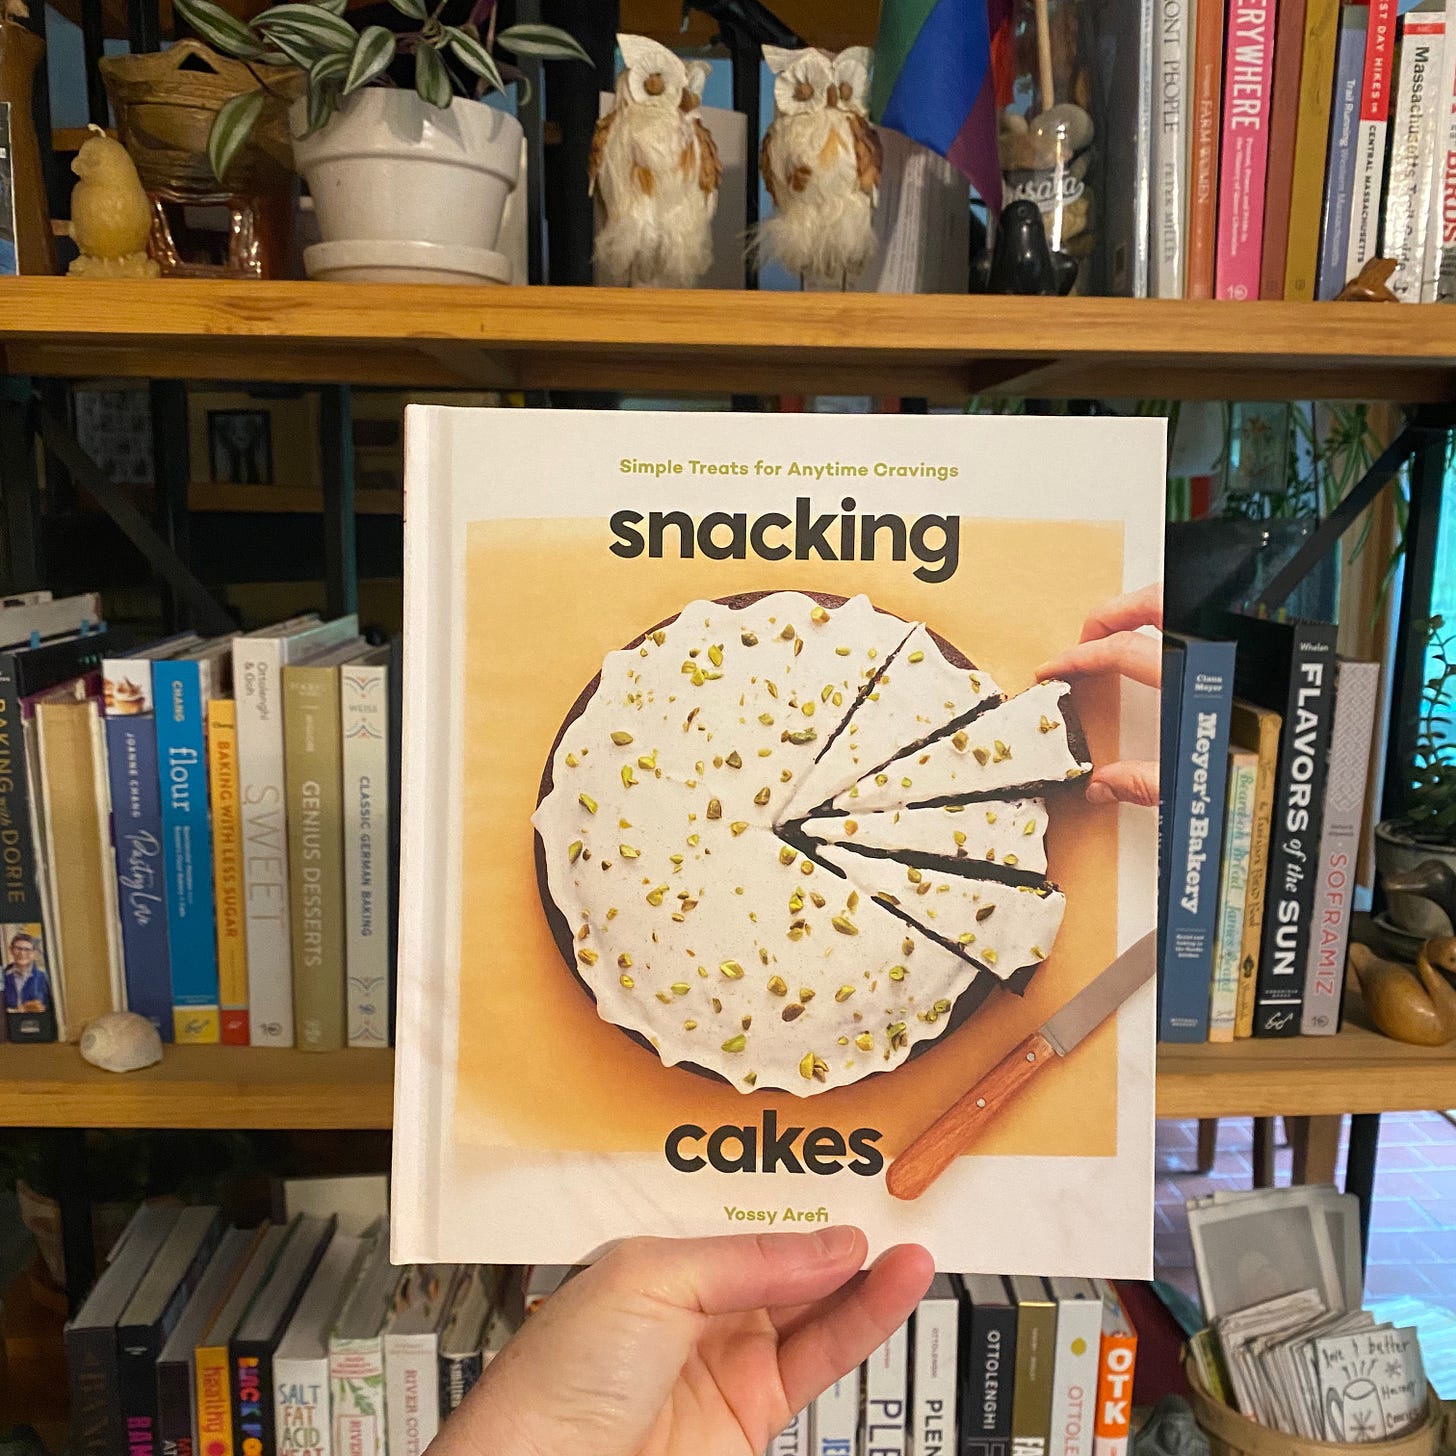 My hand holding up Snacking Cakes in front of a bookshelf of colorful cookbooks, two small owl figurines, a potted plant, and other knickknacks. 